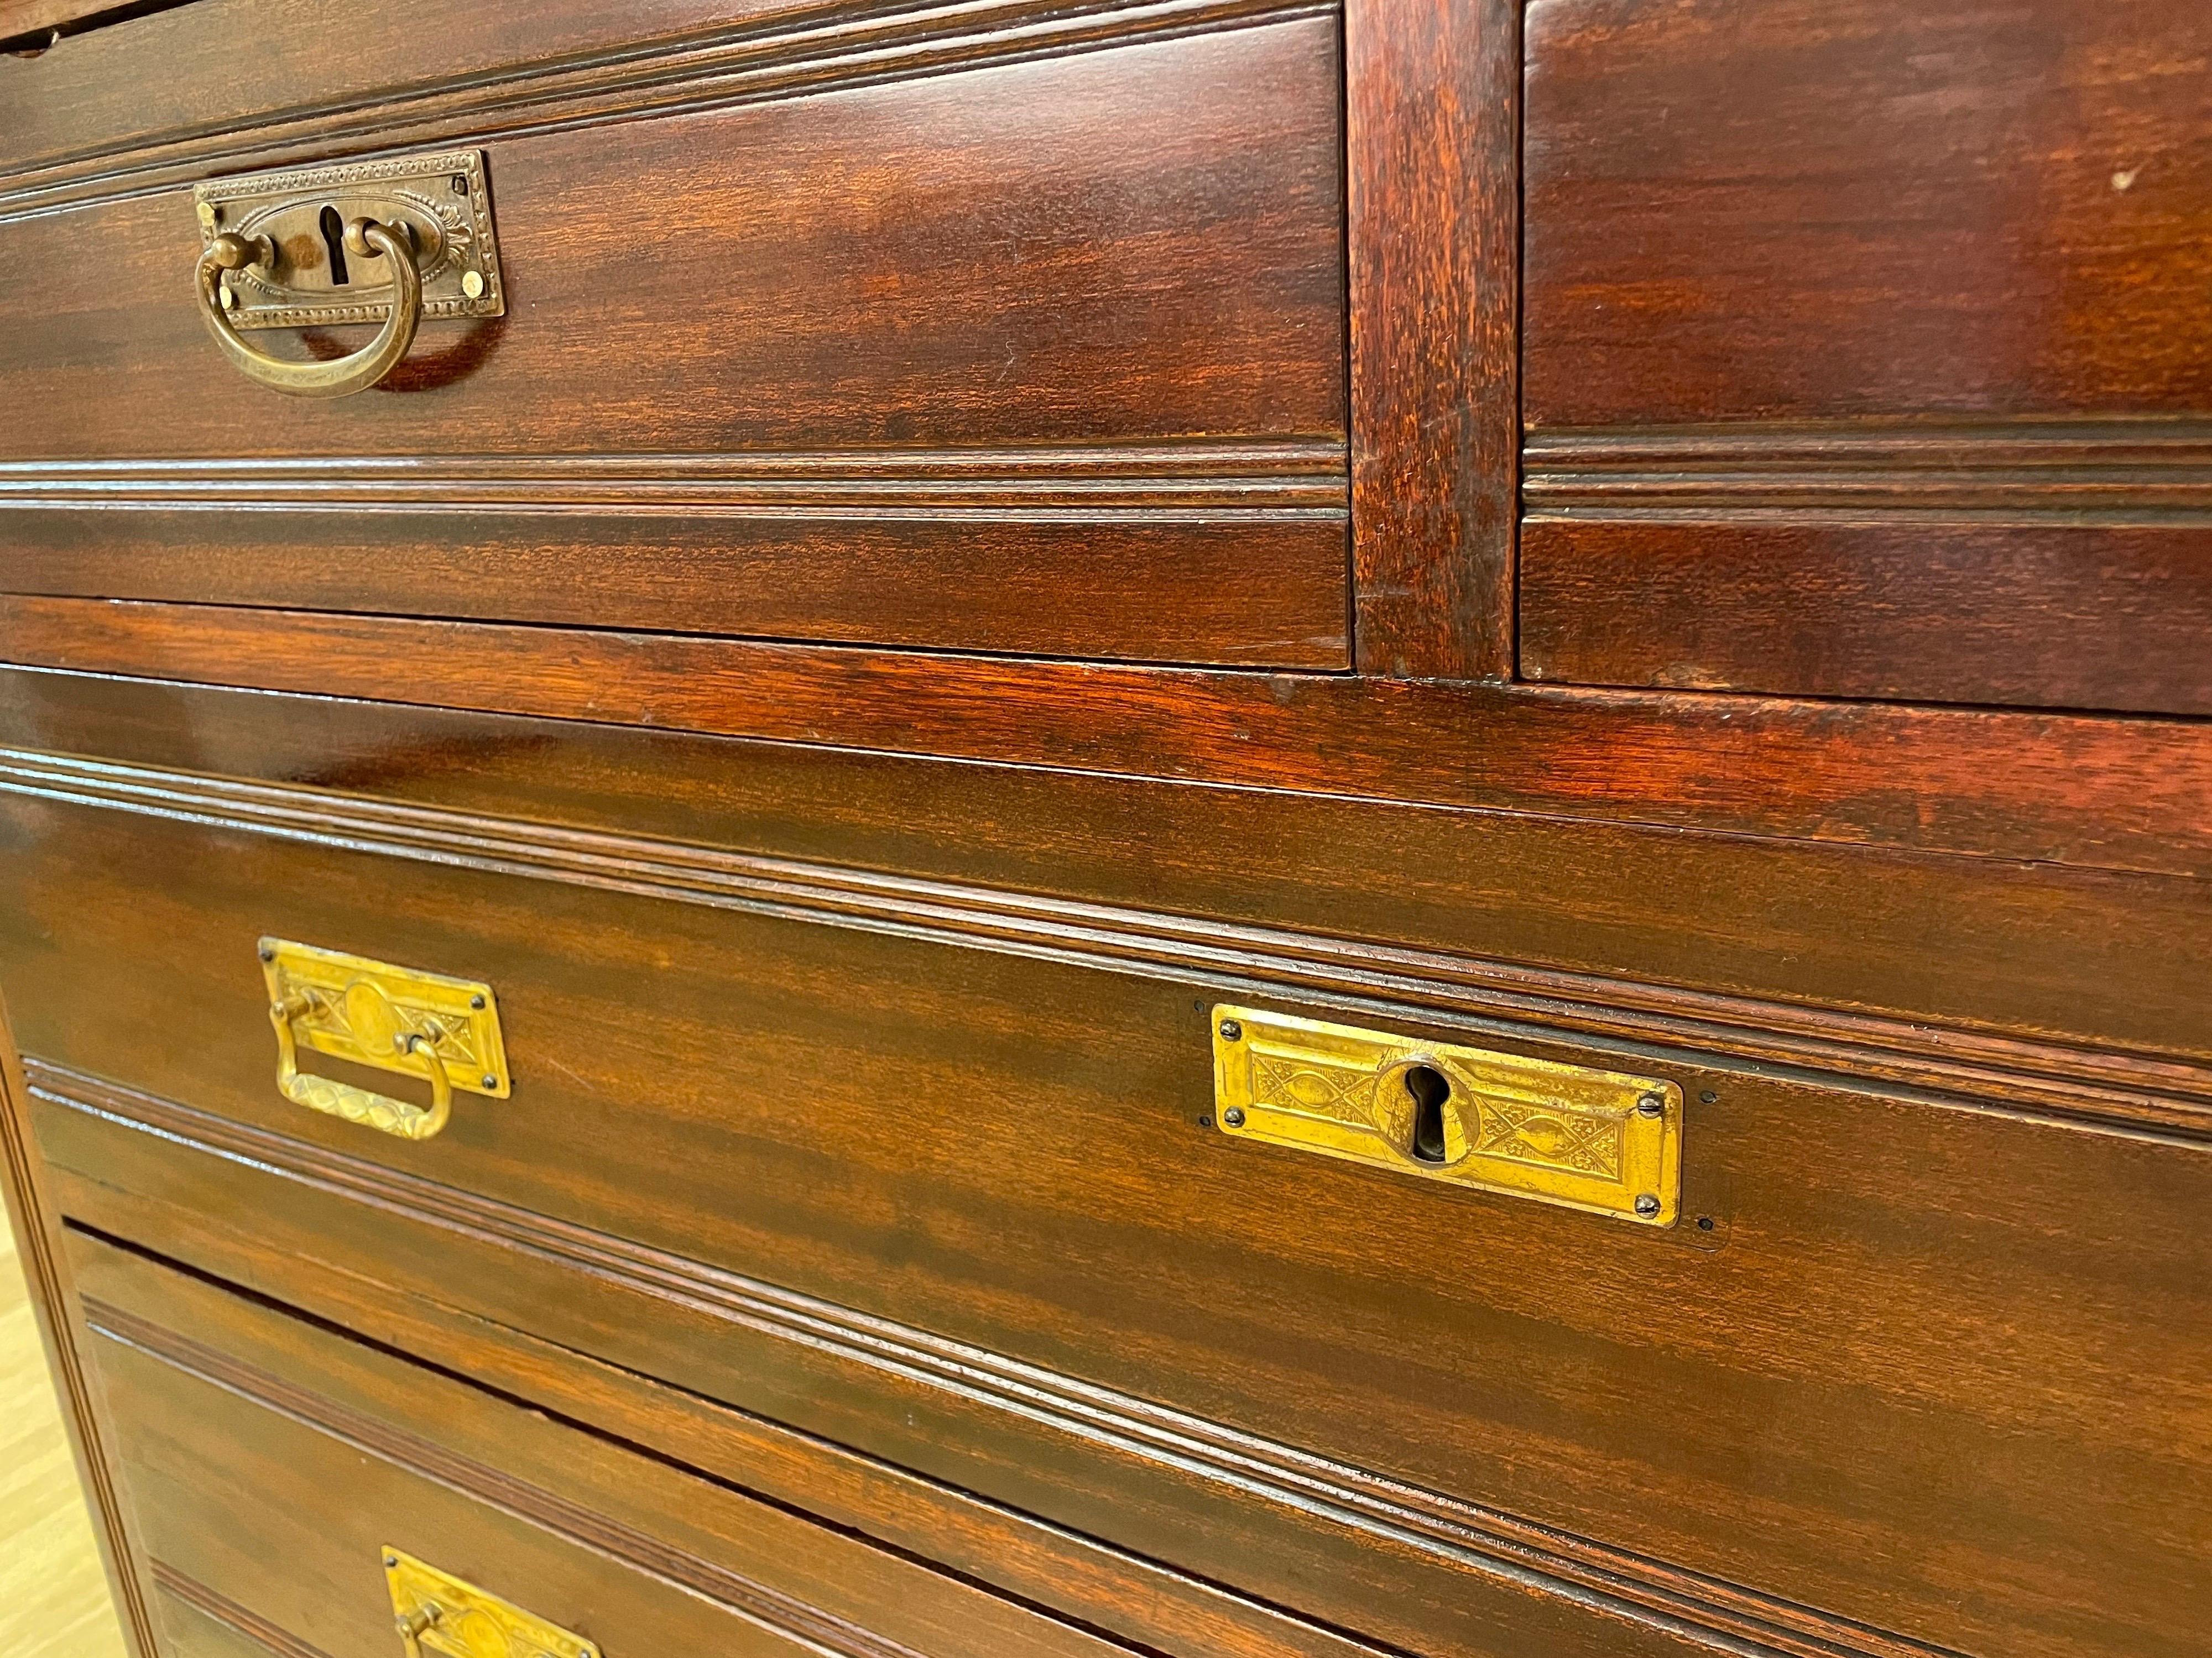 This deeply stained mahogany chest of drawers exhibits the style of the the turn of that century, with three lower drawers, a pair of upper drawers, all locking. The original hardware, pulls and key perfectly match the Jugend period's aesthetic.